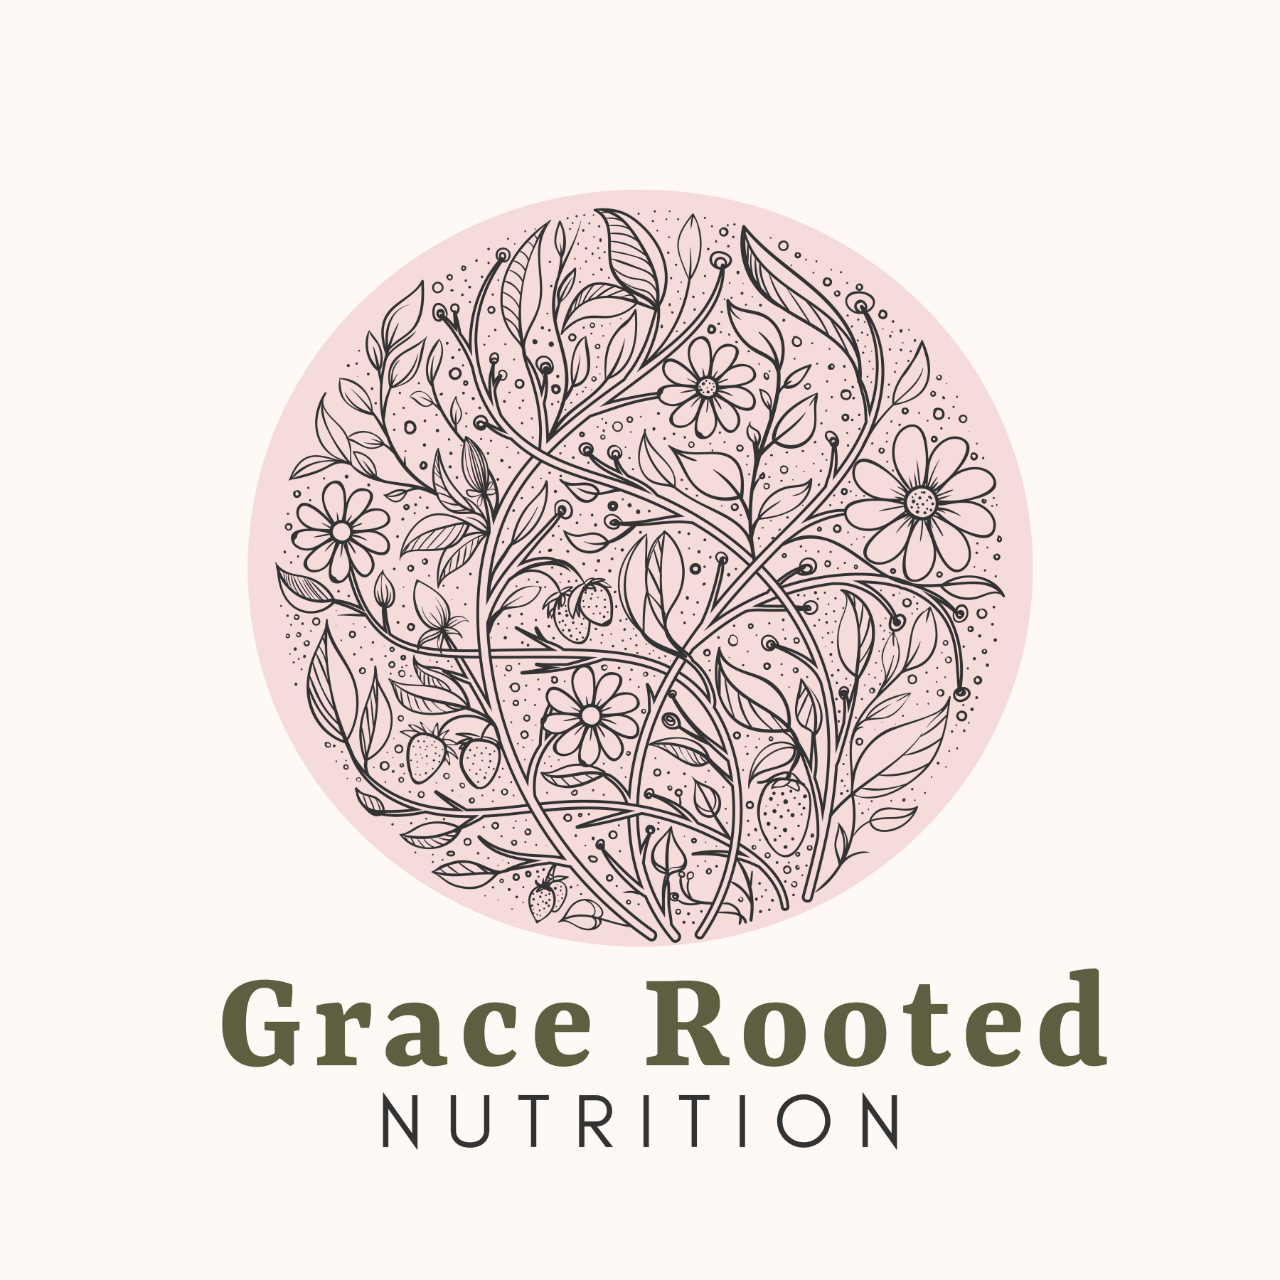 Grace Rooted Nutrition